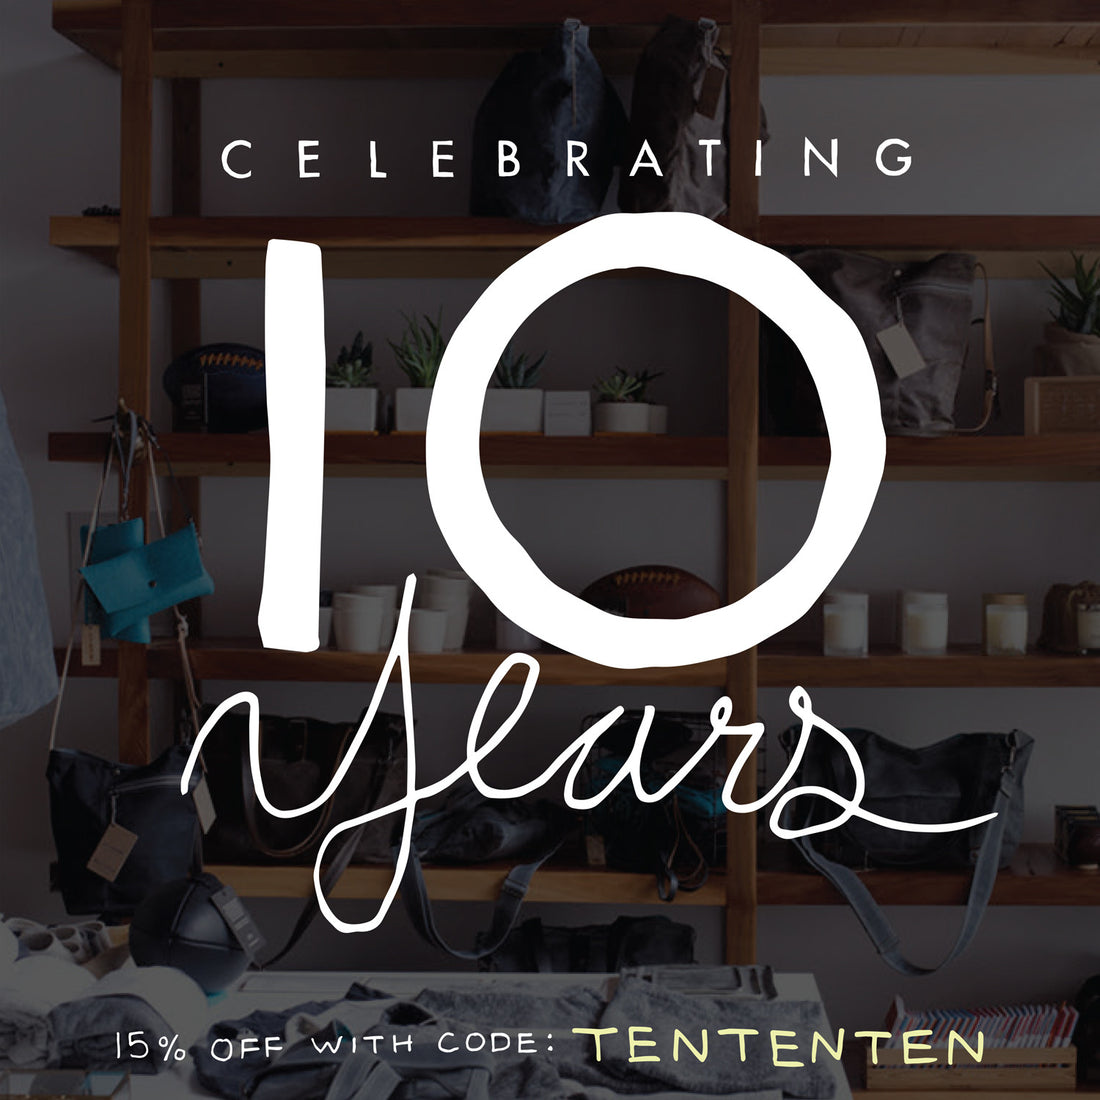 NOW WE ARE TEN!! + A SALE!!